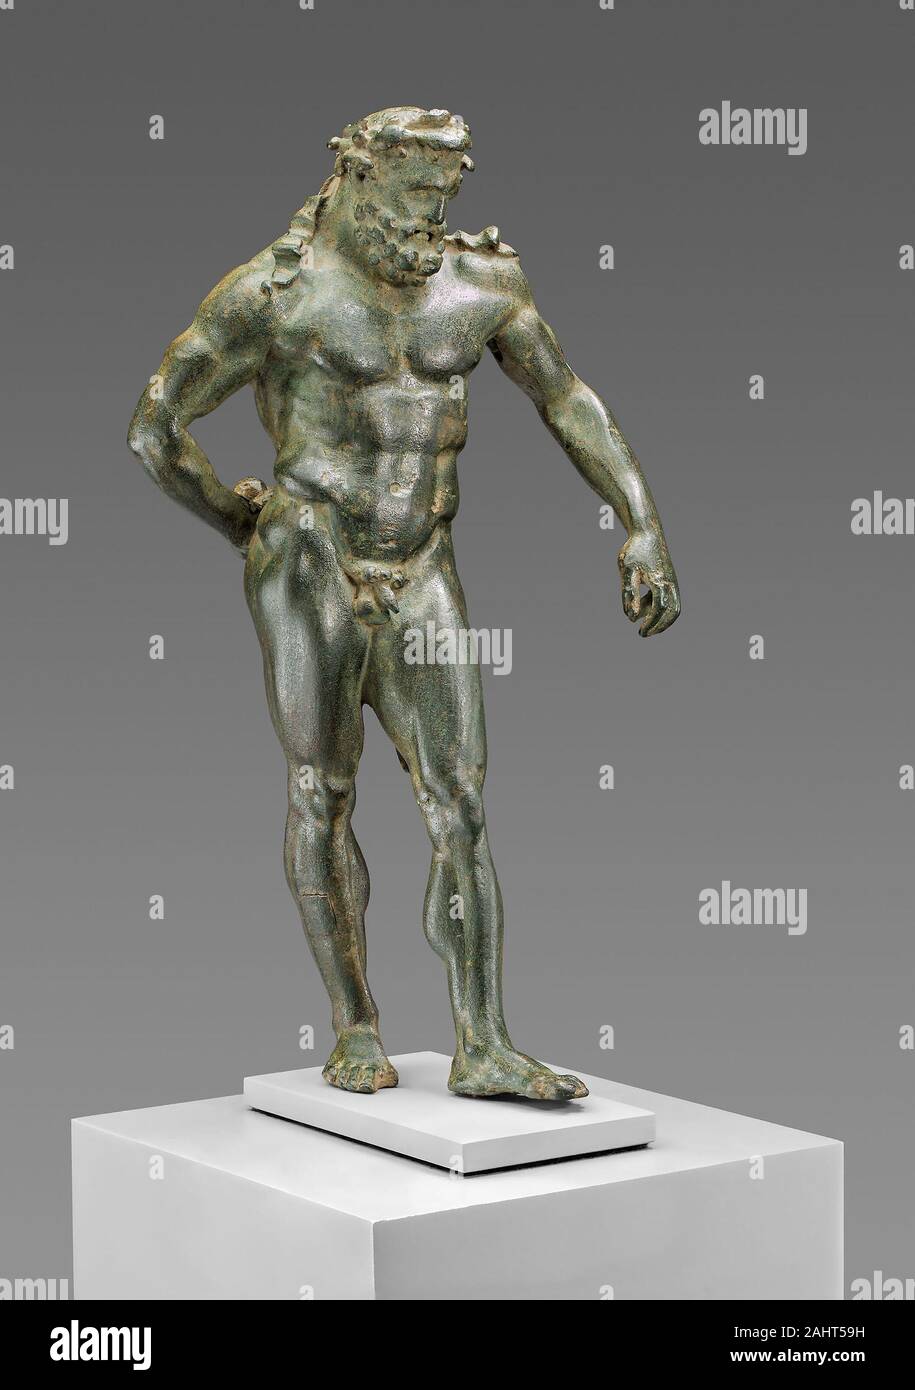 Ancient Roman. Statuette of Hercules. 50 AD–90 AD. Roman Empire. Bronze The weary hero Hercules stands at rest after completing his Eleventh Labor stealing three golden apples from a tree guarded by nymphs known as the Hesperides. Here, he holds the apples behind his back. Originally his left arm was supported by his club, which was cast separately and is now missing. This statuette is a copy of the lost masterpiece of Herakles by the Greek sculptor Lysippos, which became one of the definitive images of Hercules in classical antiquity and into the Renaissance in the 15th century. Stock Photo